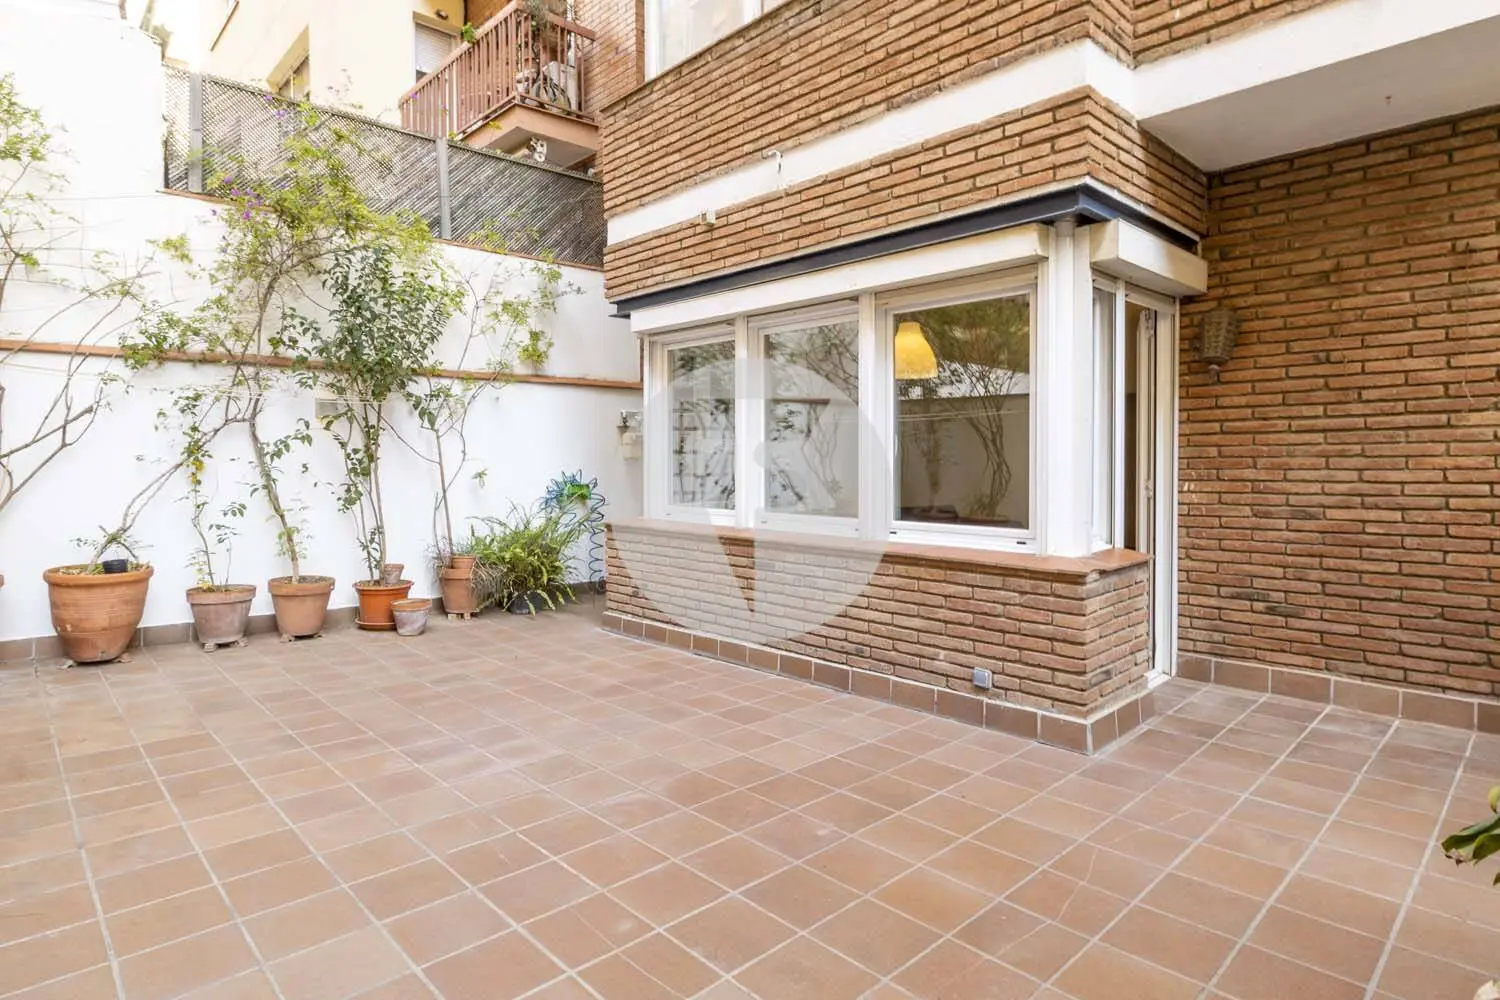 Three bedrooms and large patio in Vallcarca 5